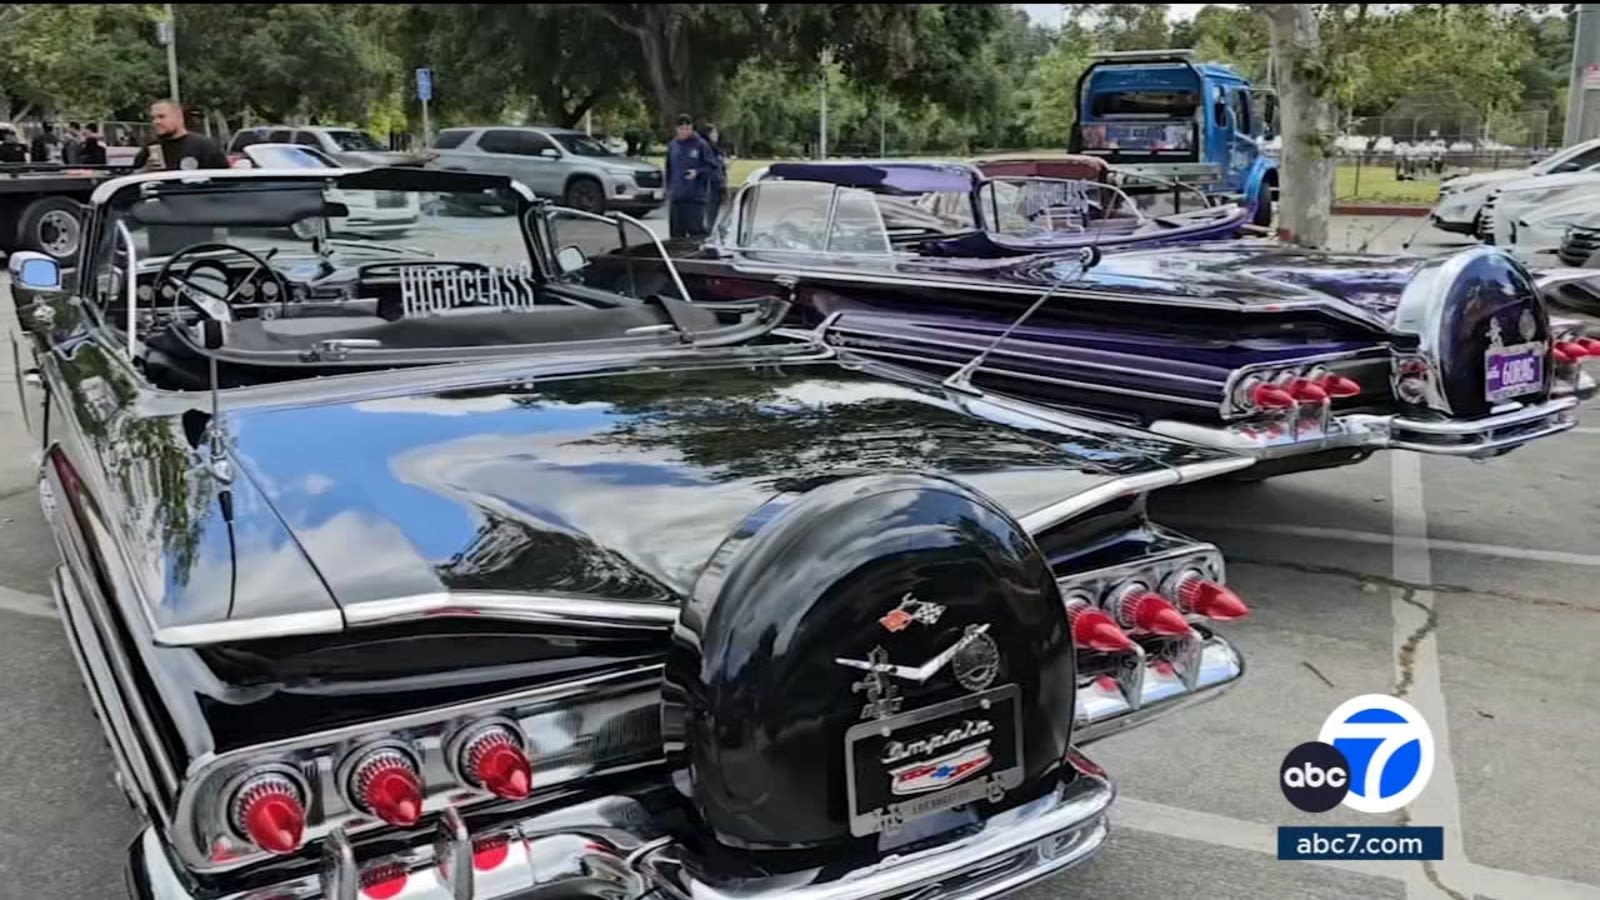 Lowrider Cinco de Mayo event forced to Pasadena after LAPD shuts it down citing lack of permits